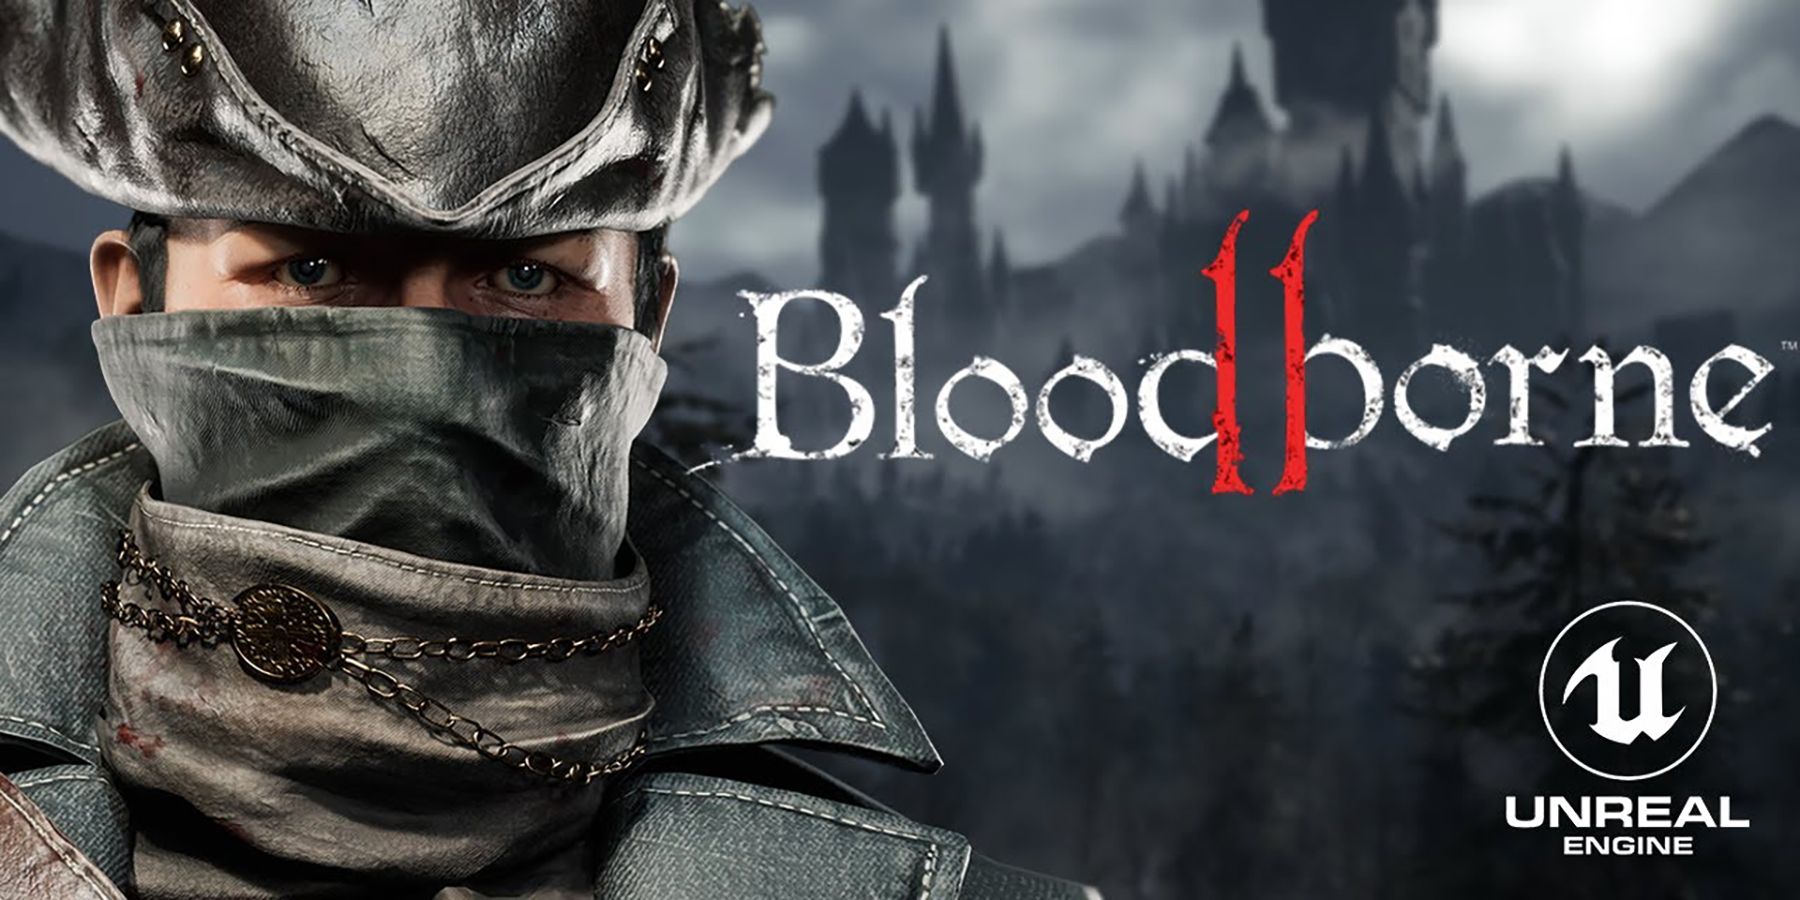 Bloodborne Game of the Year Edition confirmed